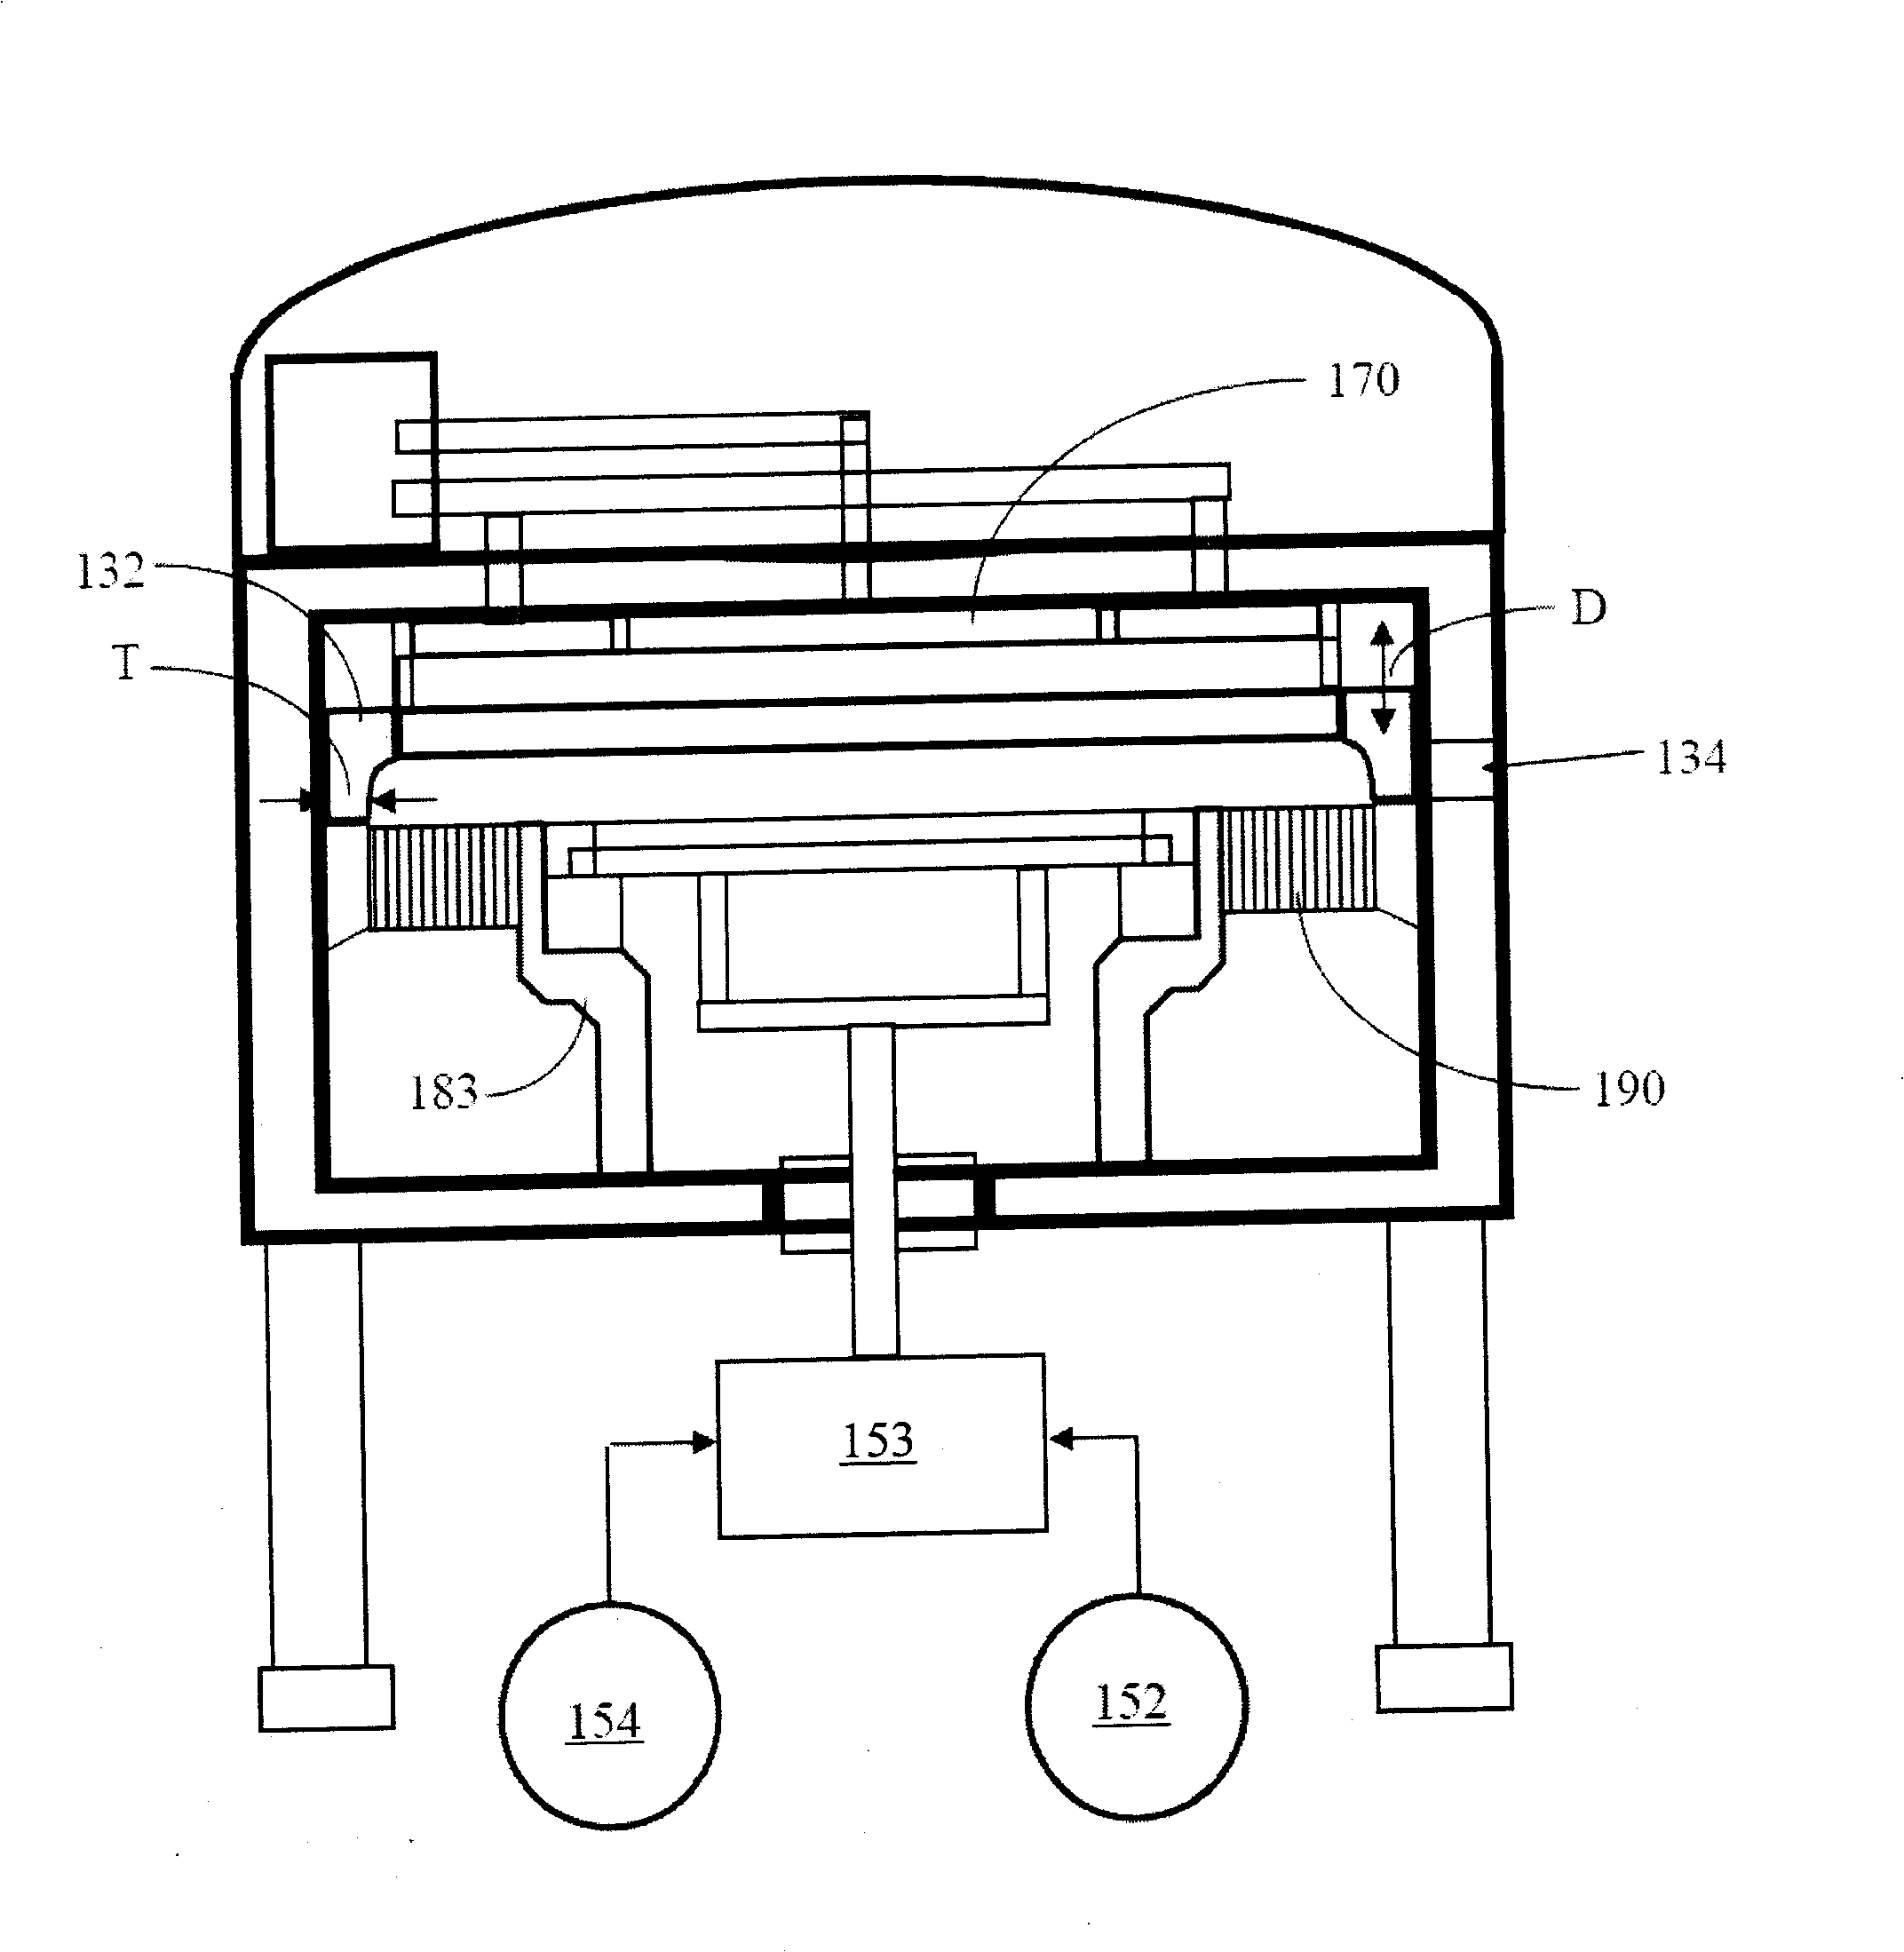 Decoupling reactive ion etching chamber containing multiple processing platforms